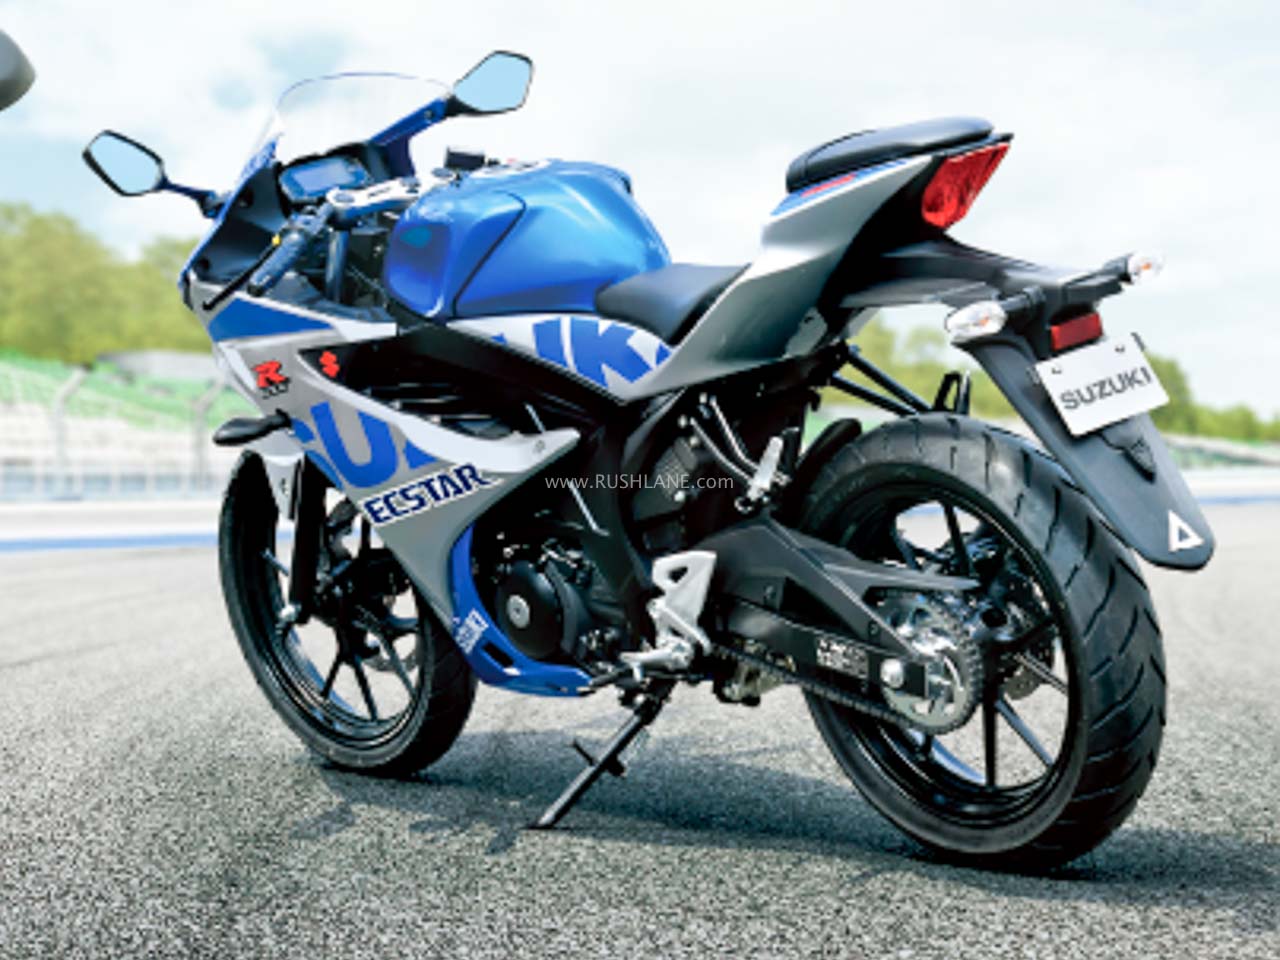 2020 Suzuki Gsx R125 Motogp Edition Debuts With New Colour Scheme Motor News Space All About The World Of Motors